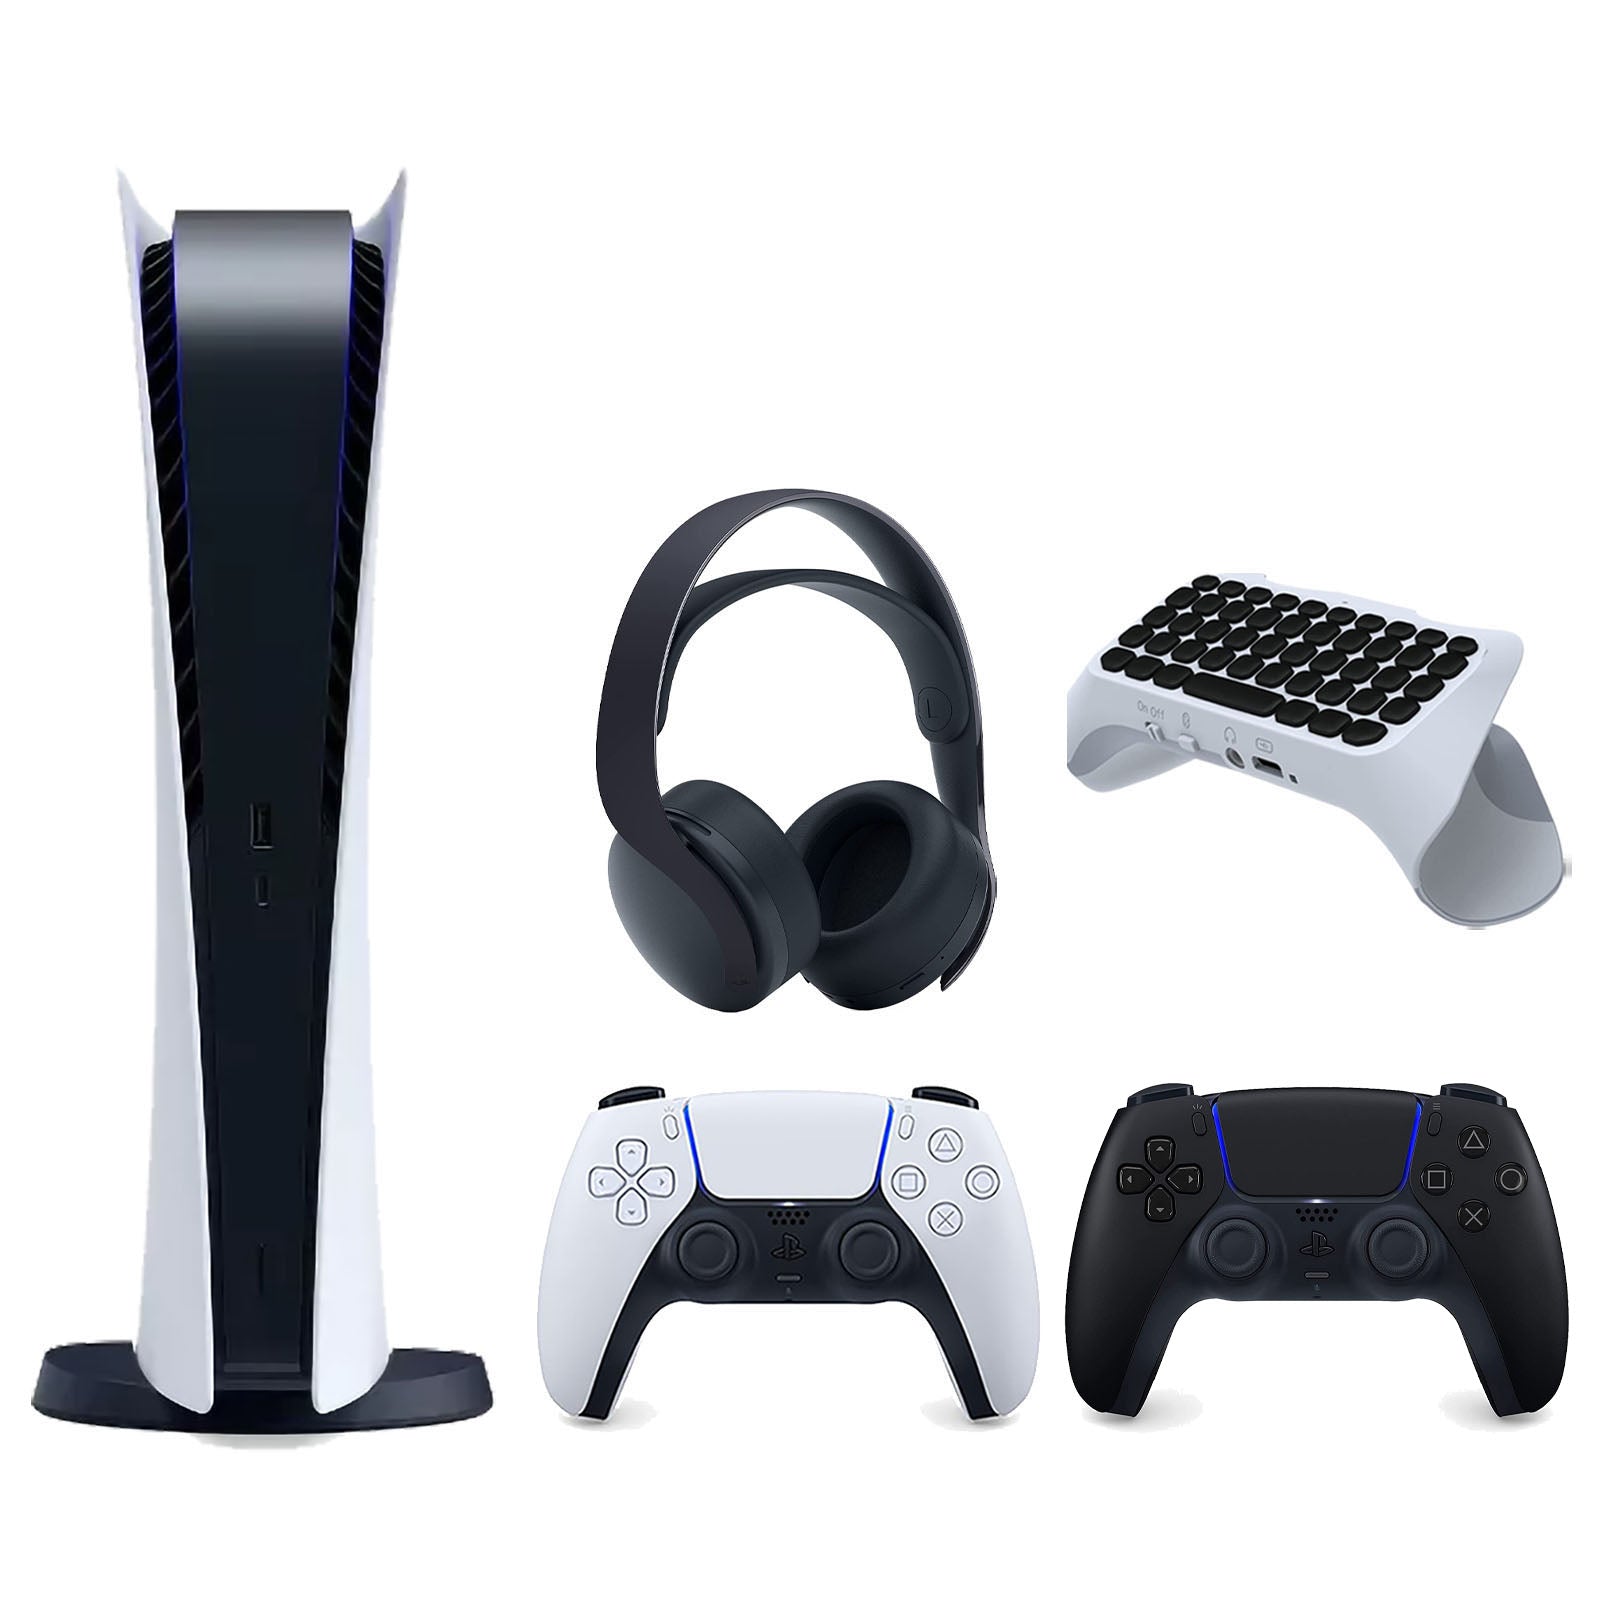 Sony Playstation 5 Digital Edition Console with Extra Black Controller, Black PULSE 3D Headset and Surge QuickType 2.0 Wireless PS5 Controller Keypad Bundle - Pro-Distributing